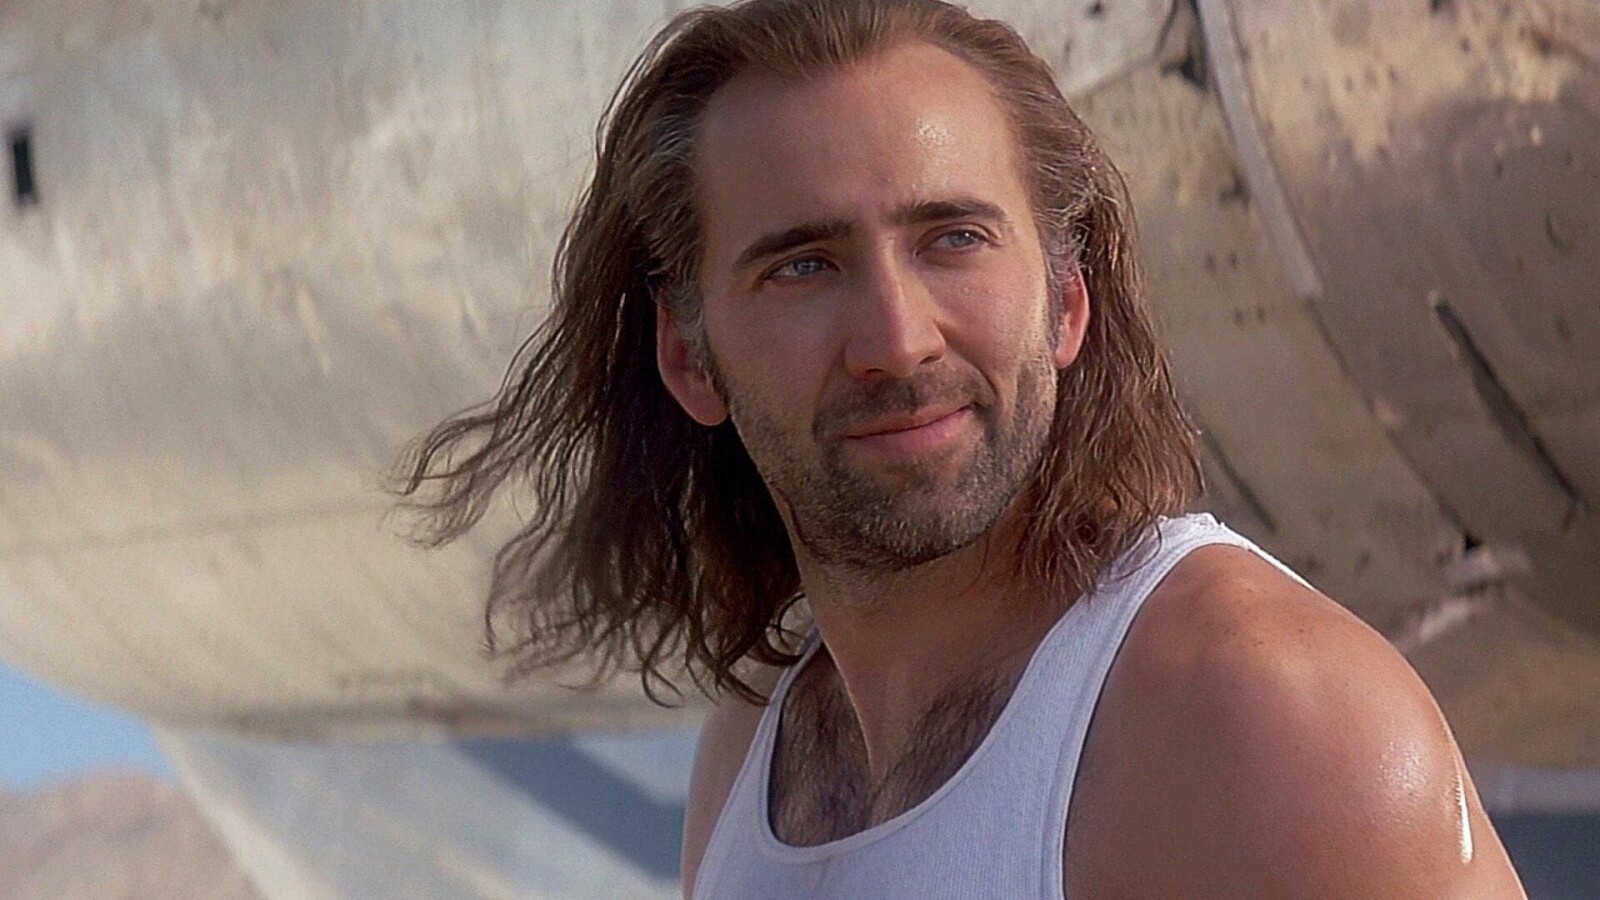 No thanks, Marvel: Nicolas Cage explains why he doesn’t need a spot in the MCU: “I’m Nick Cage!”